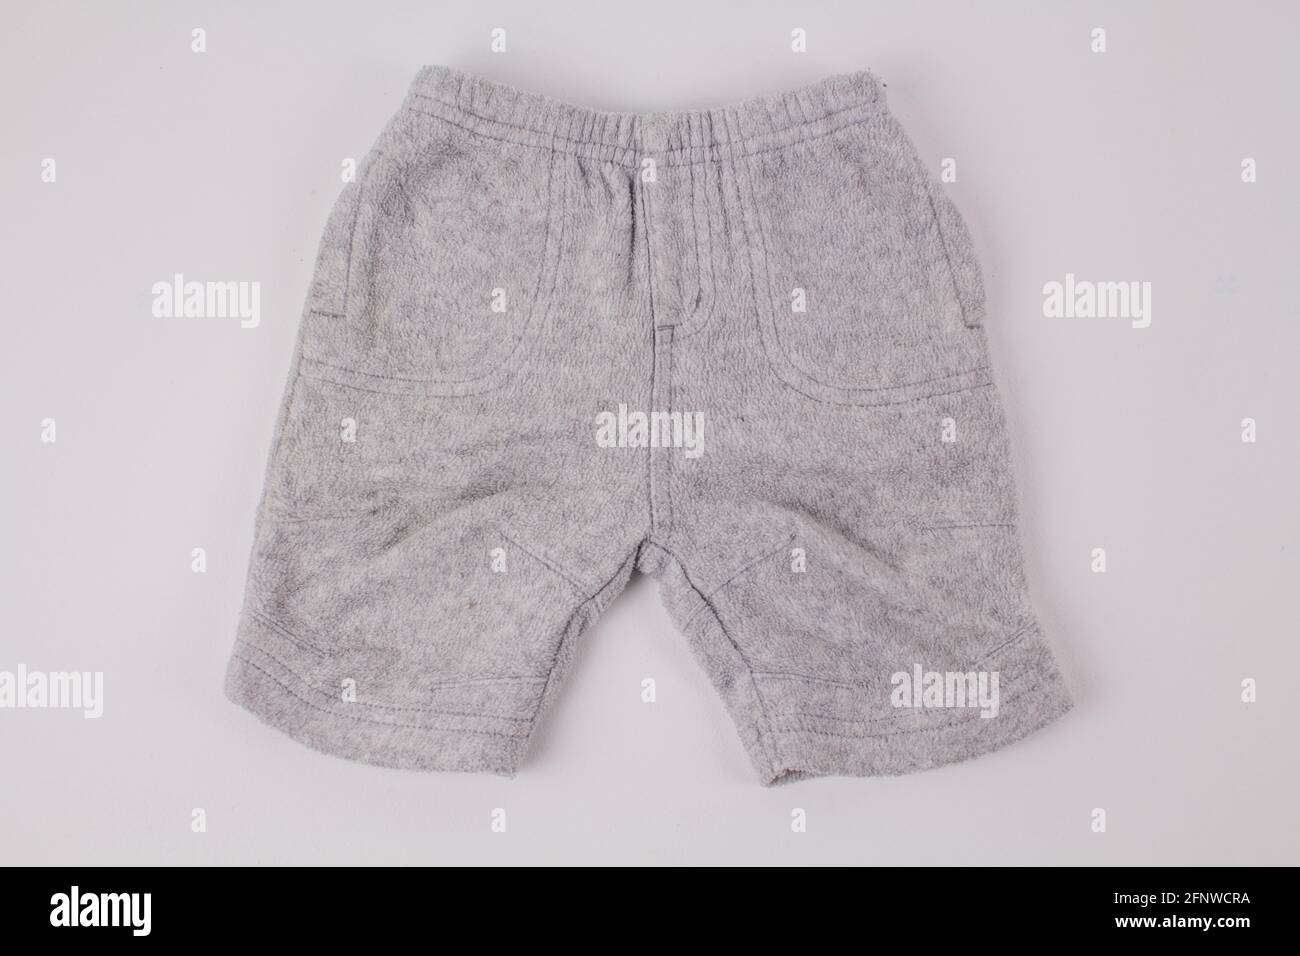 a gray children's shorts on a white background Stock Photo